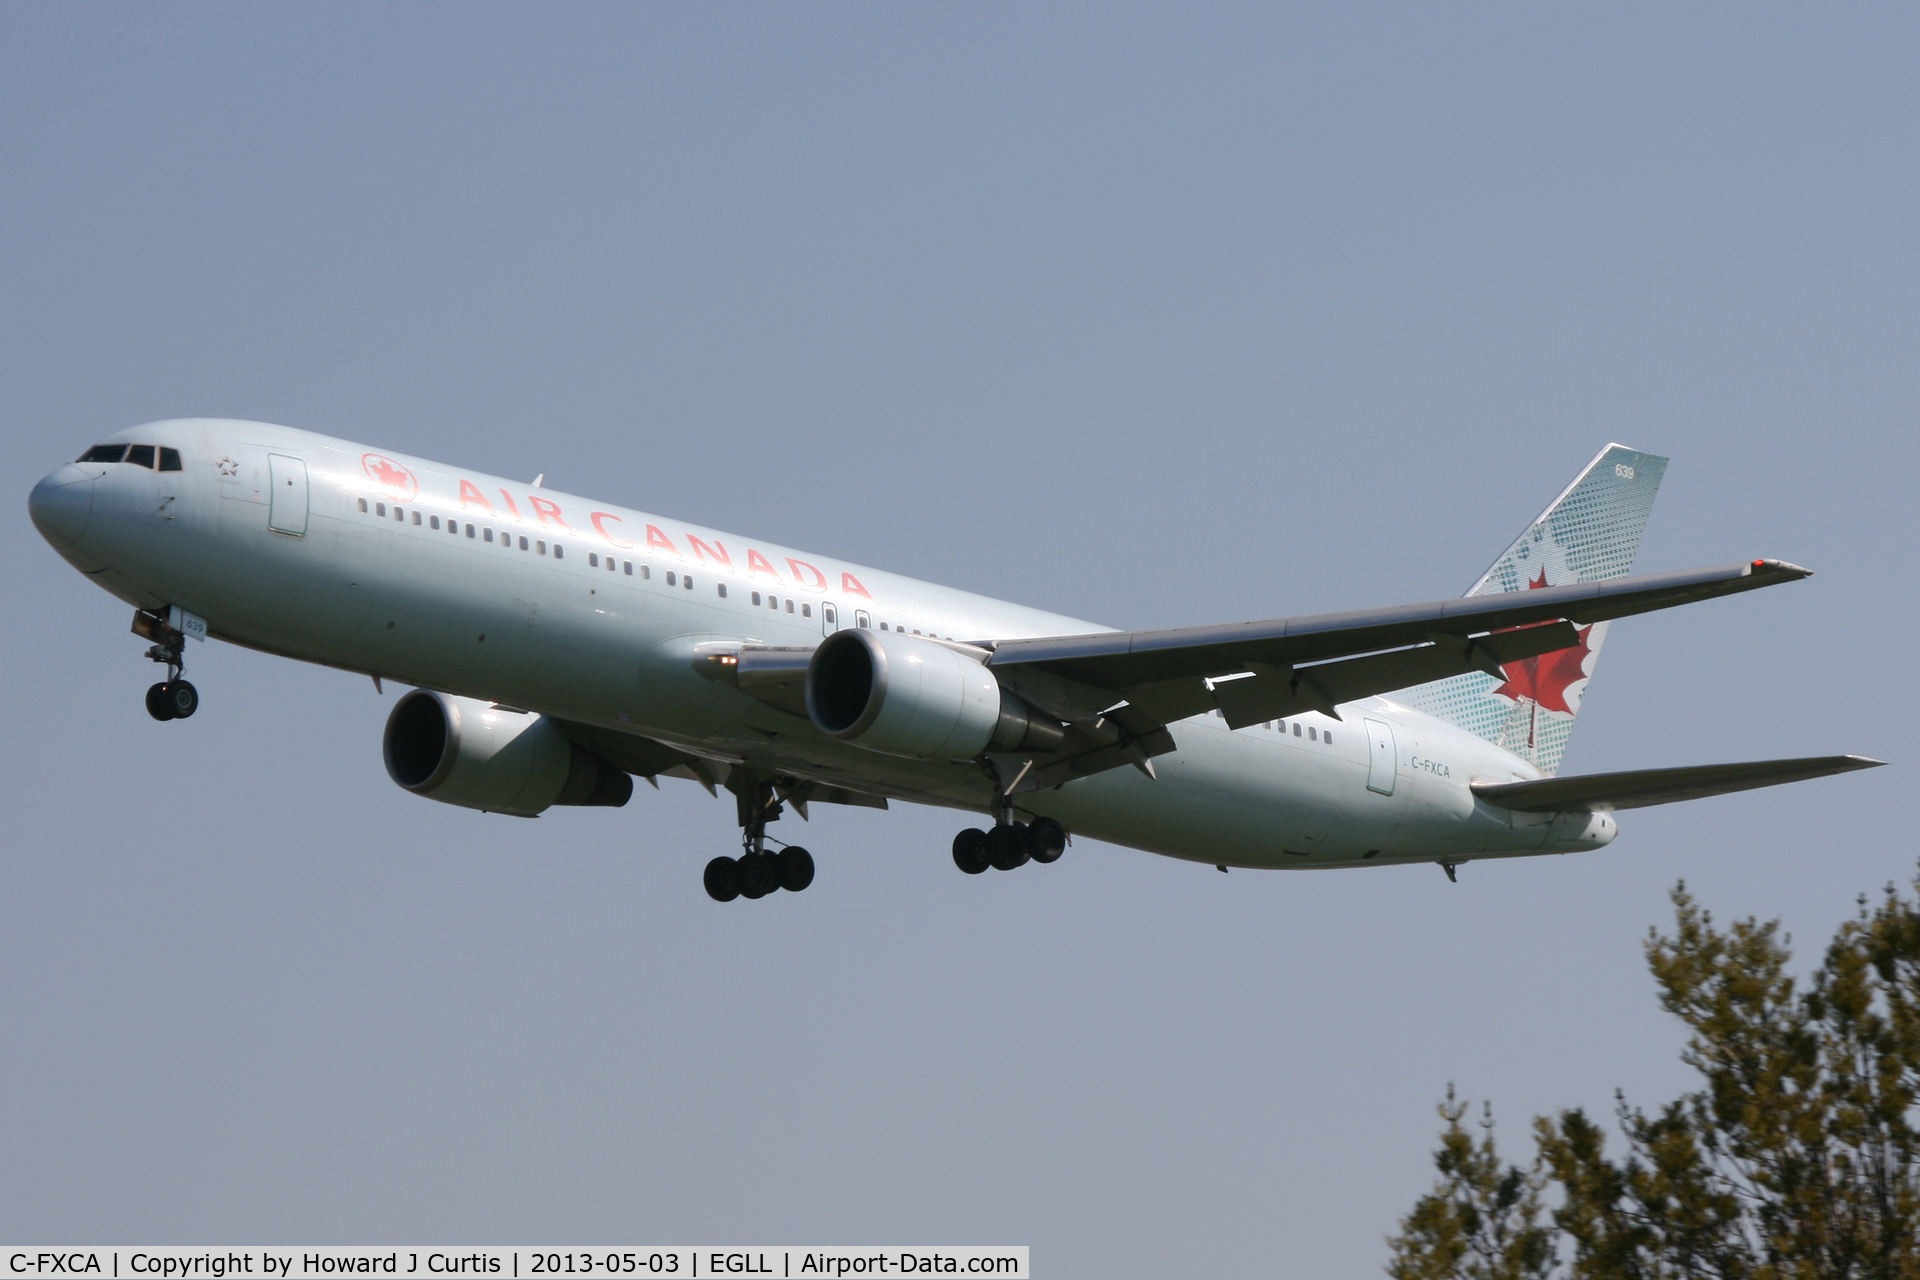 C-FXCA, 1990 Boeing 767-375/ER C/N 24574, Air Canada, on approach to runway 27L.